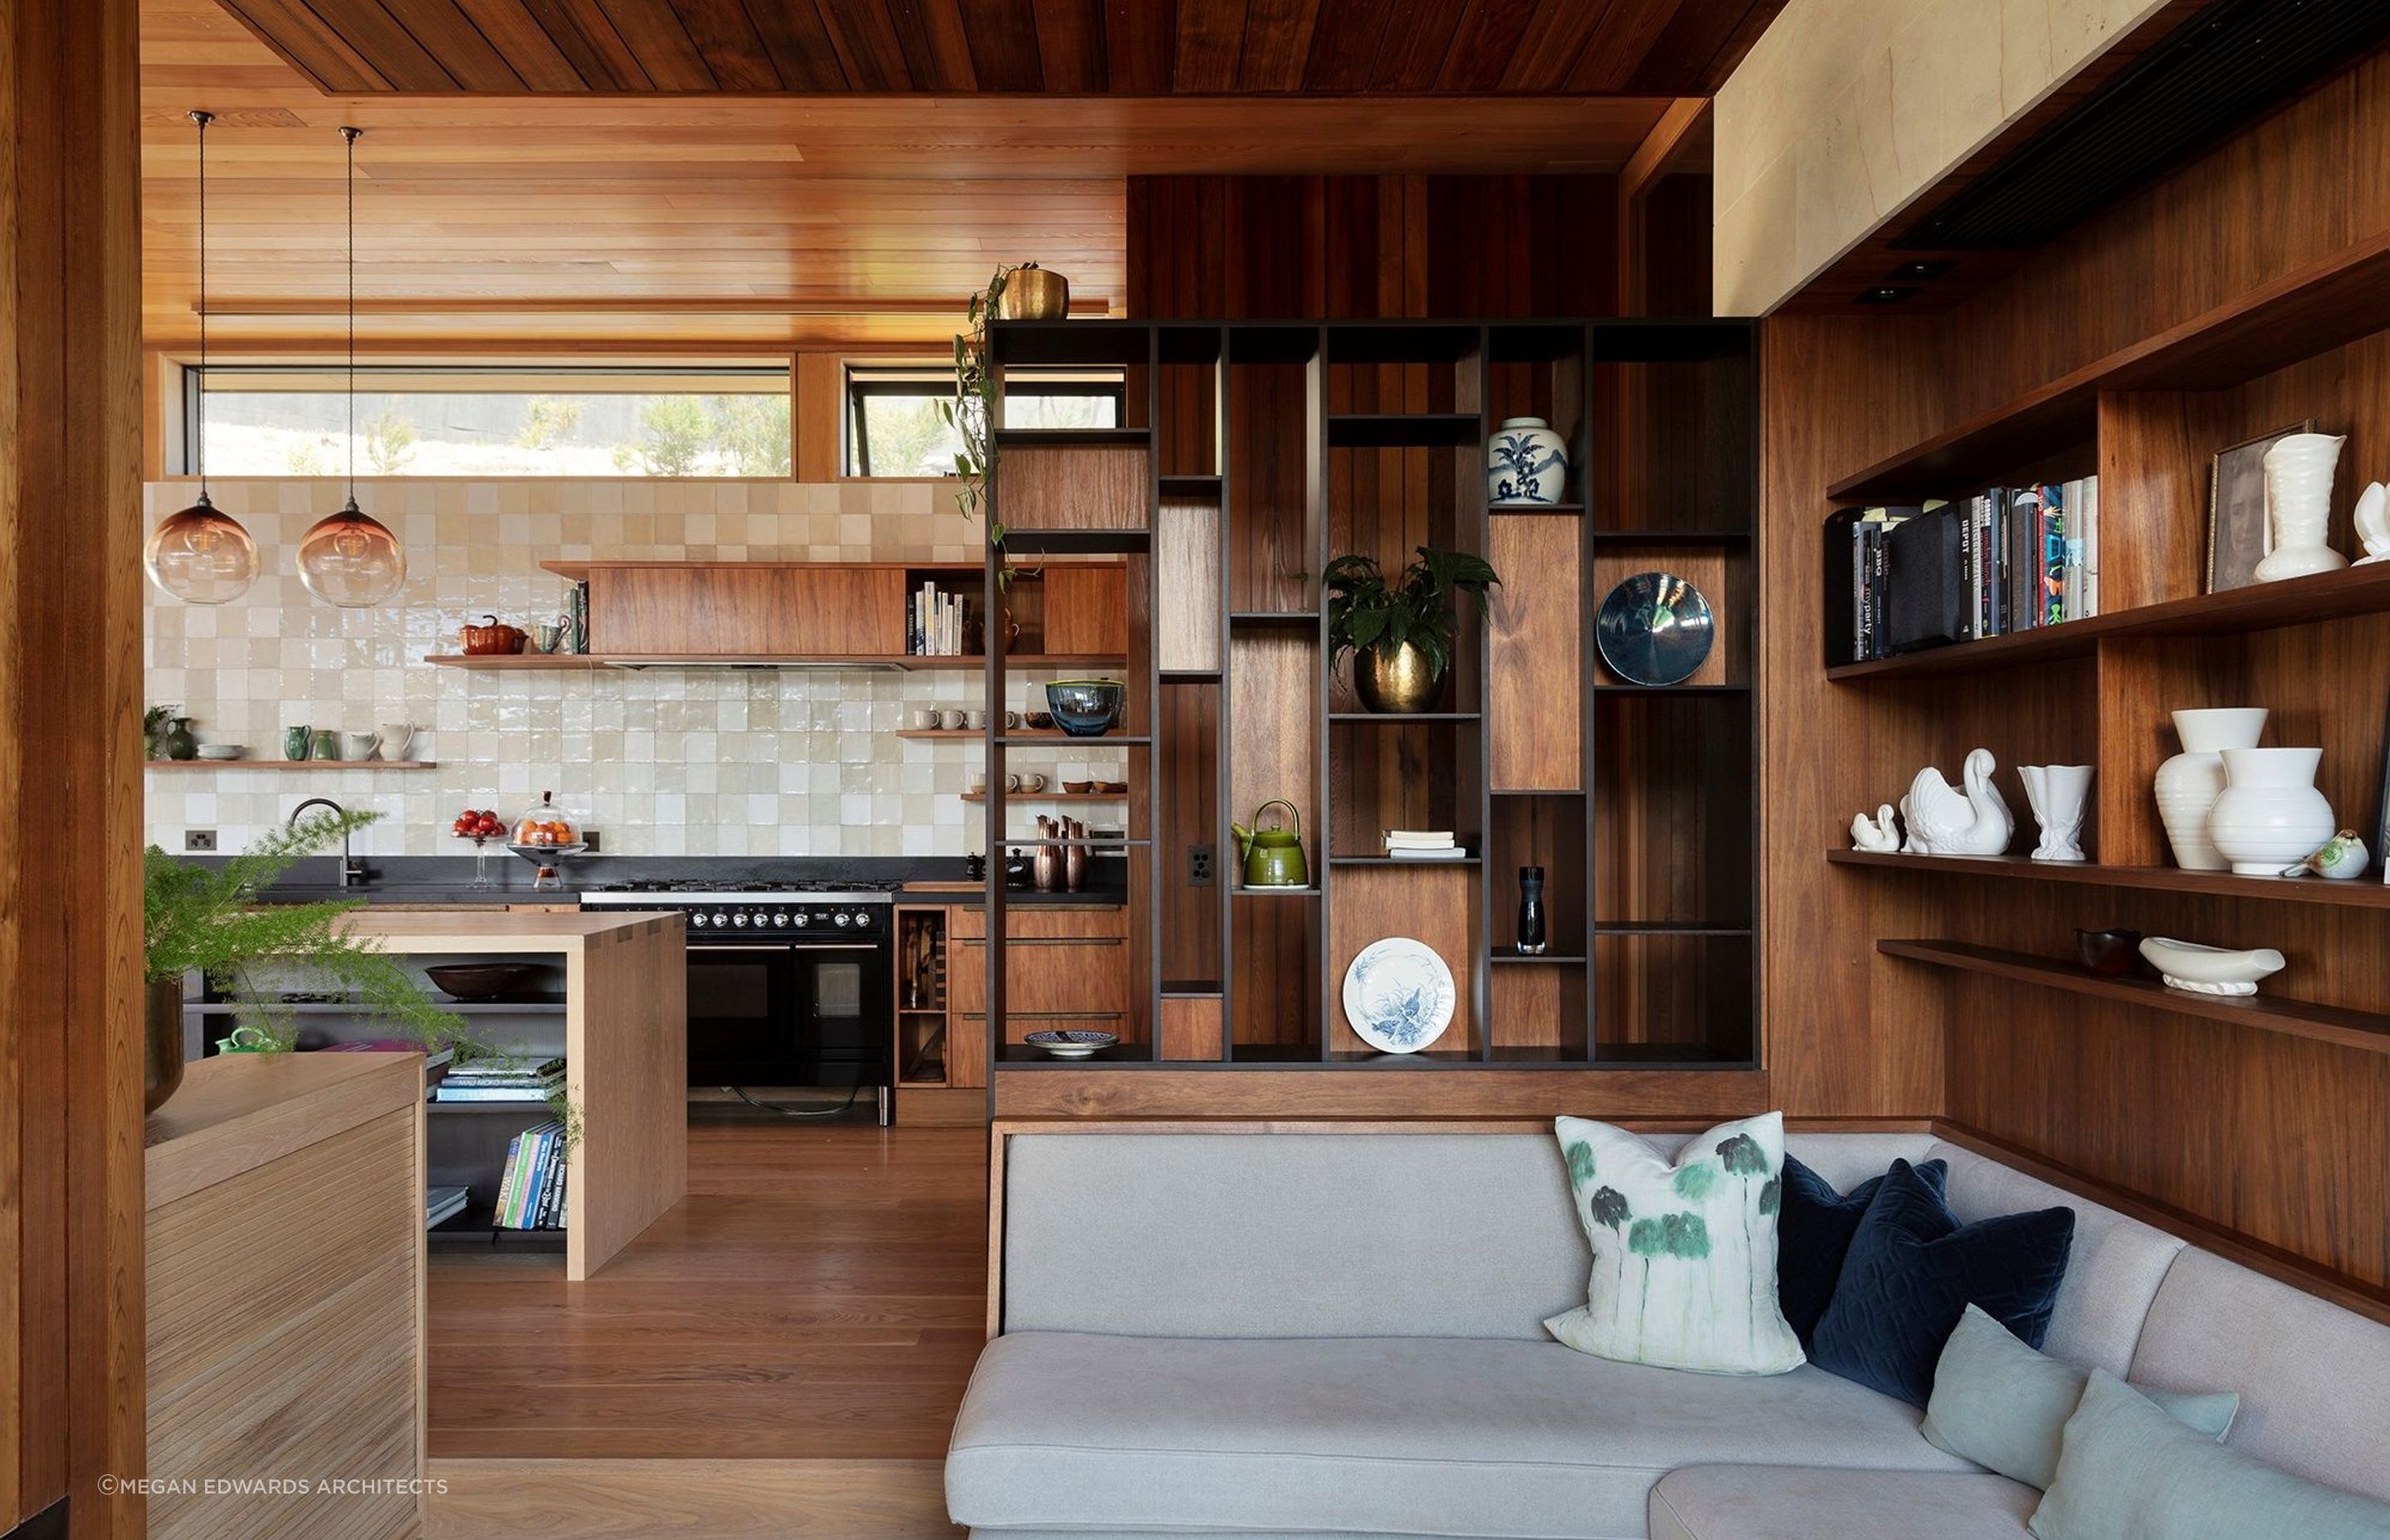 Natural materials like wood and geometric shapes are key features of Mid-century modern design style, beautifully expressed in this home in Greenhithe. | Photography: Sam Hartnett